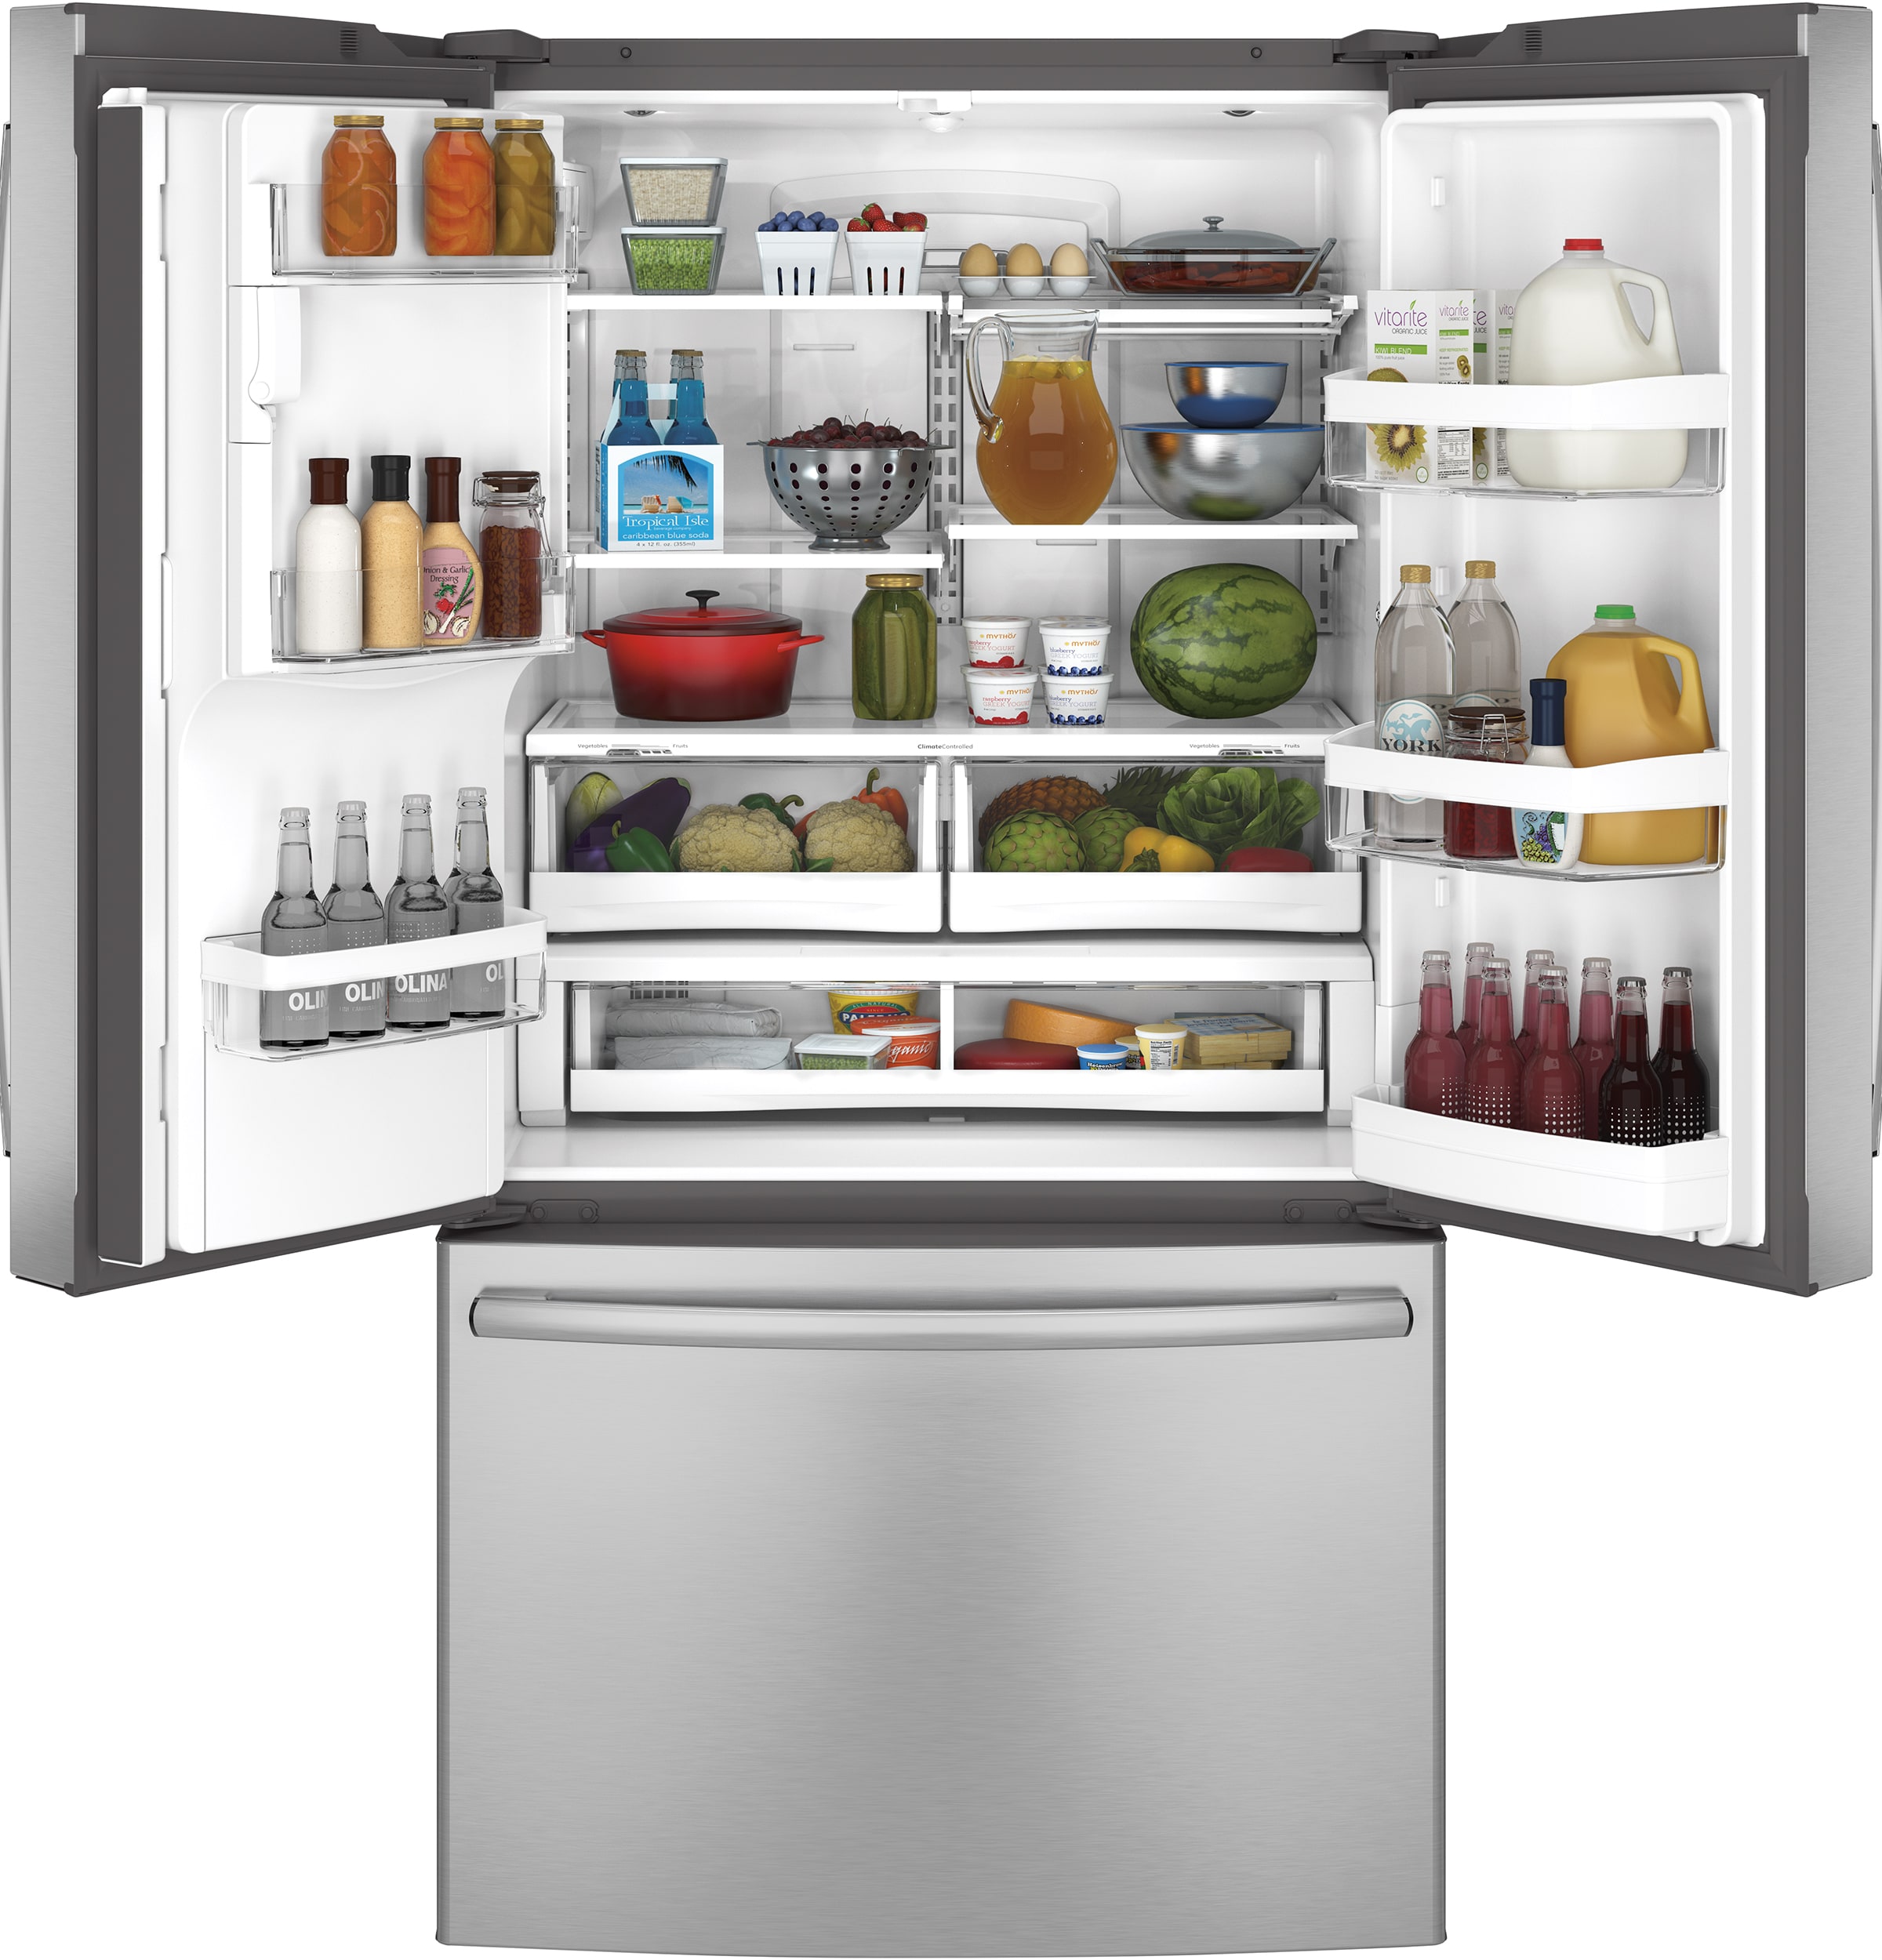 GE Profile™ Series ENERGY STAR® 22.1 Cu. Ft. Counter-Depth Fingerprint  Resistant French-Door Refrigerator with Hands-Free AutoFill